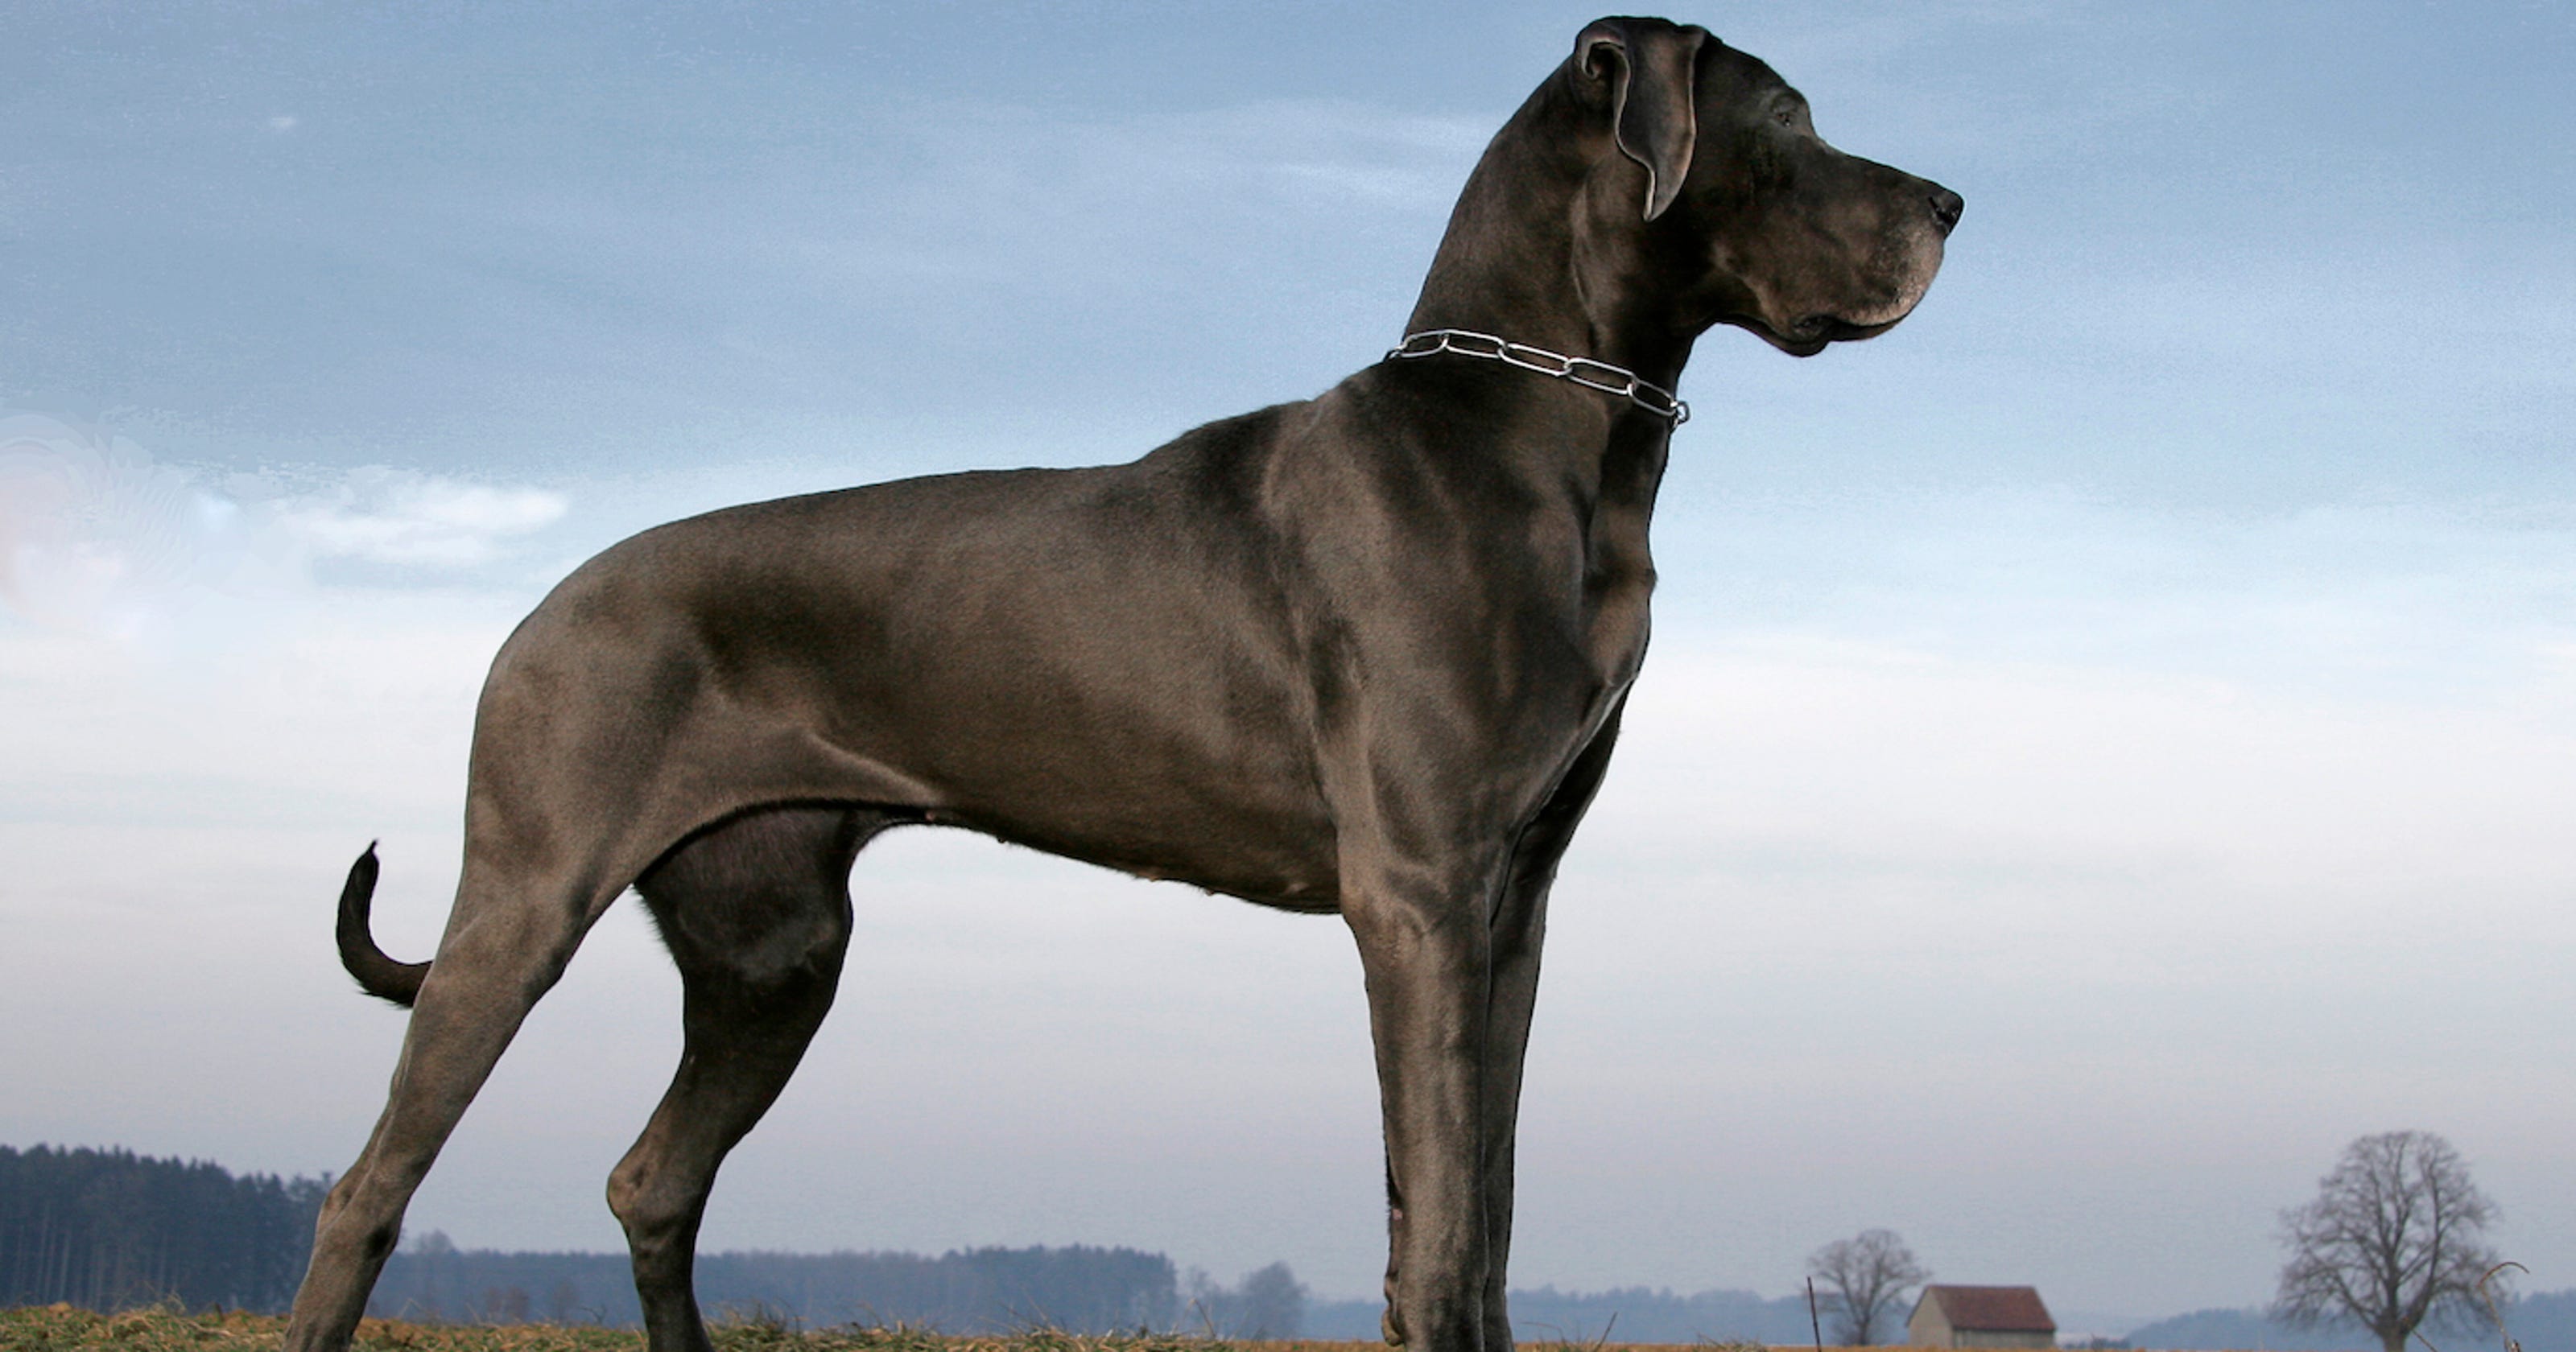 Good dog! The most popular giant dog breeds in America